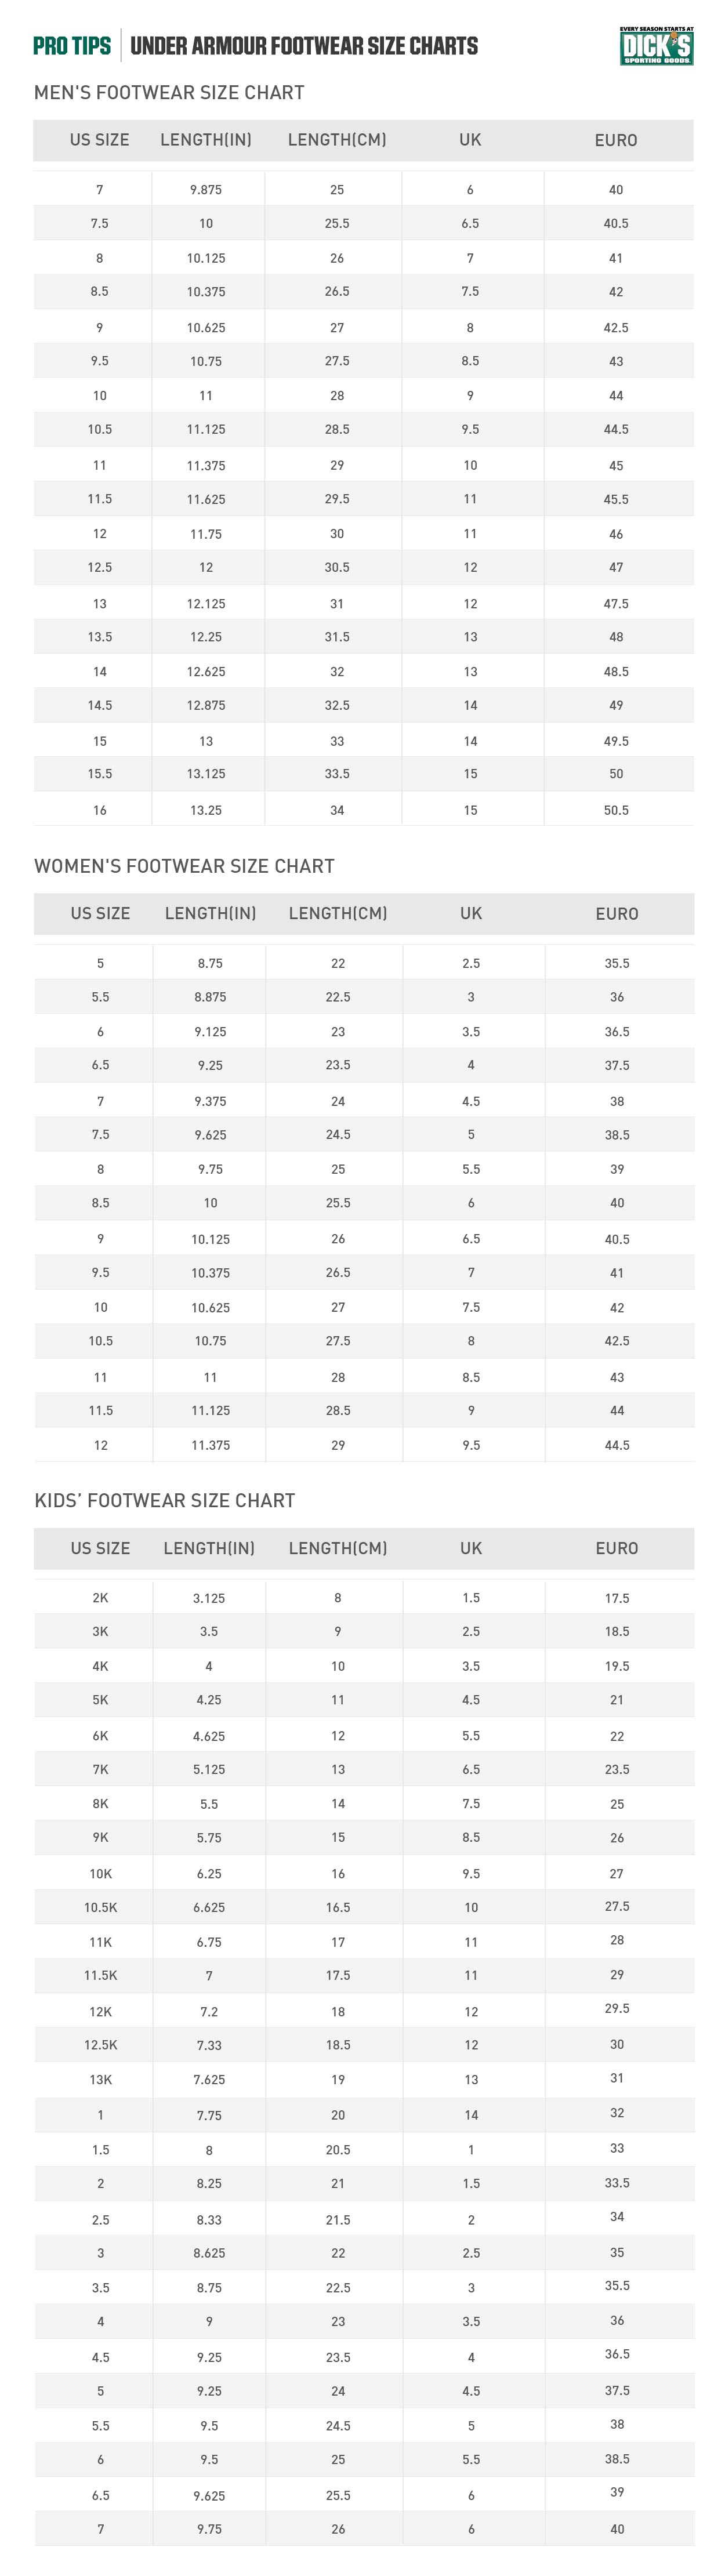 Under Armour® Footwear Size Charts 